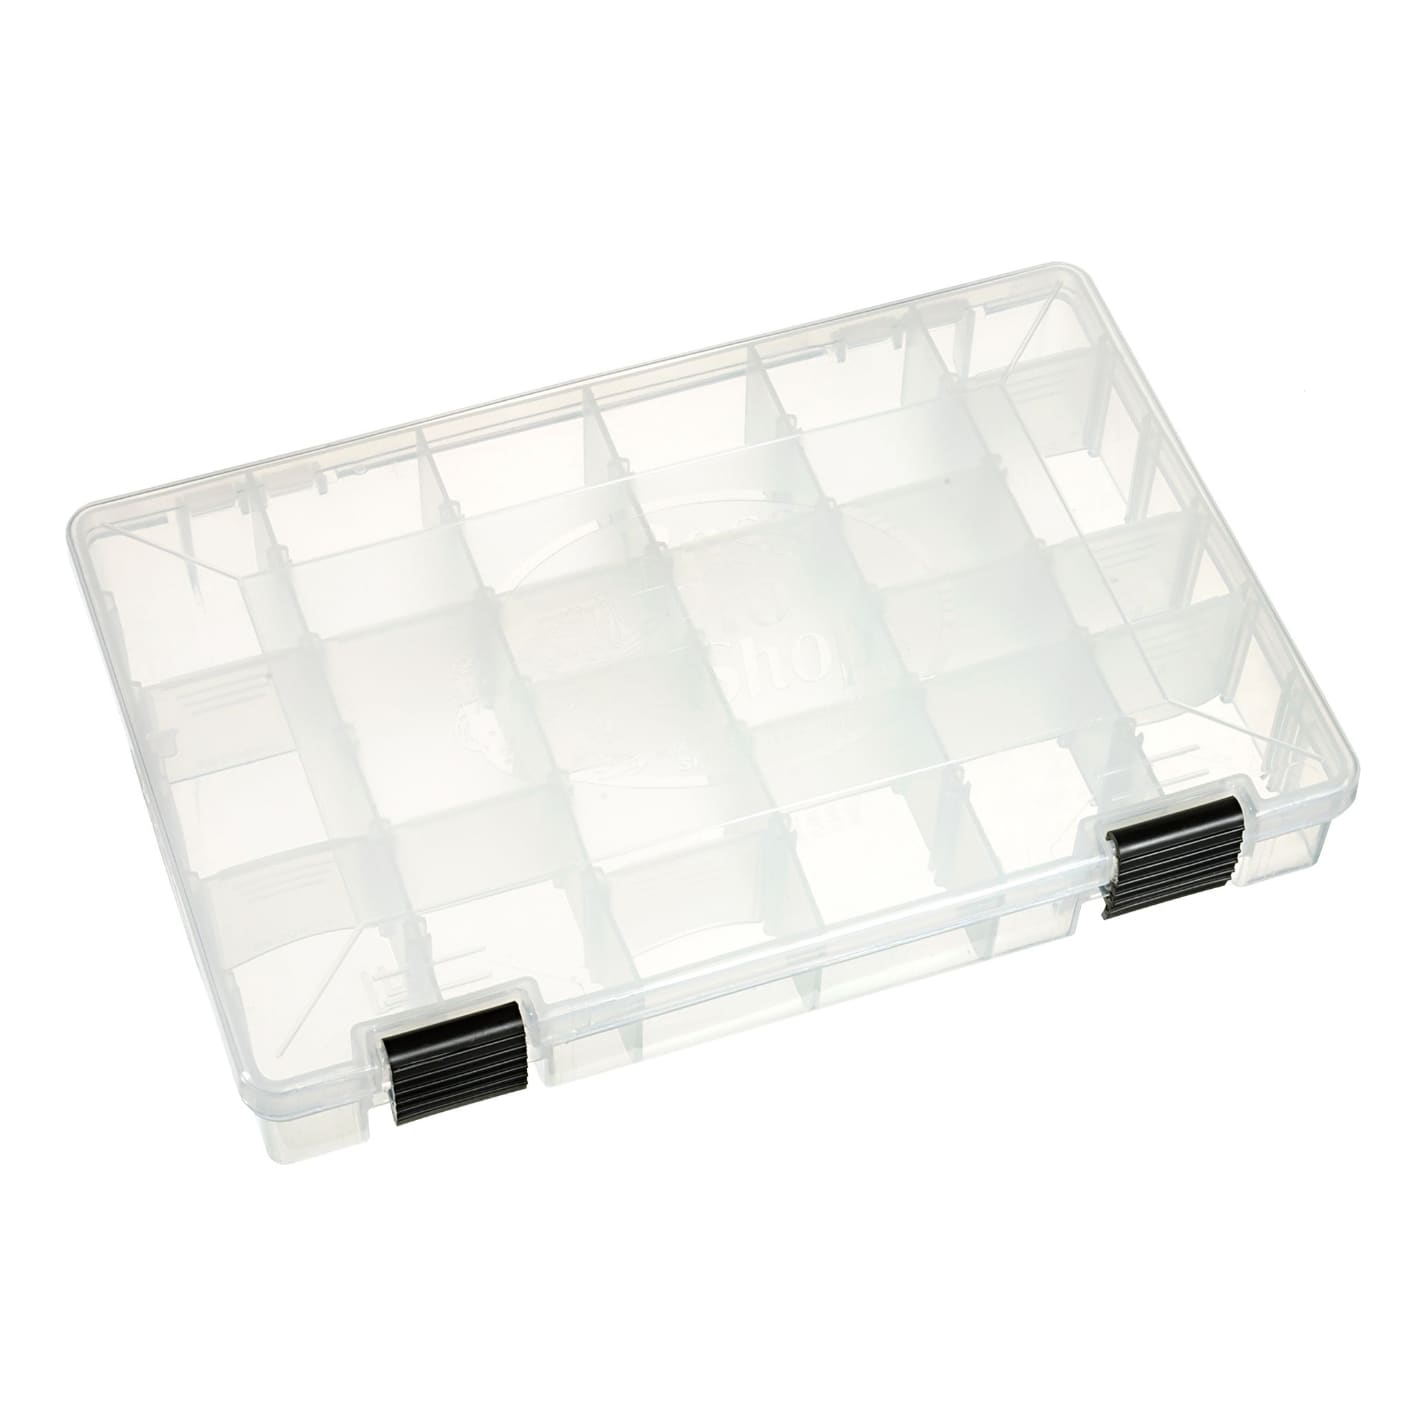 Bass Pro Shops® Tackle Storage Boxes